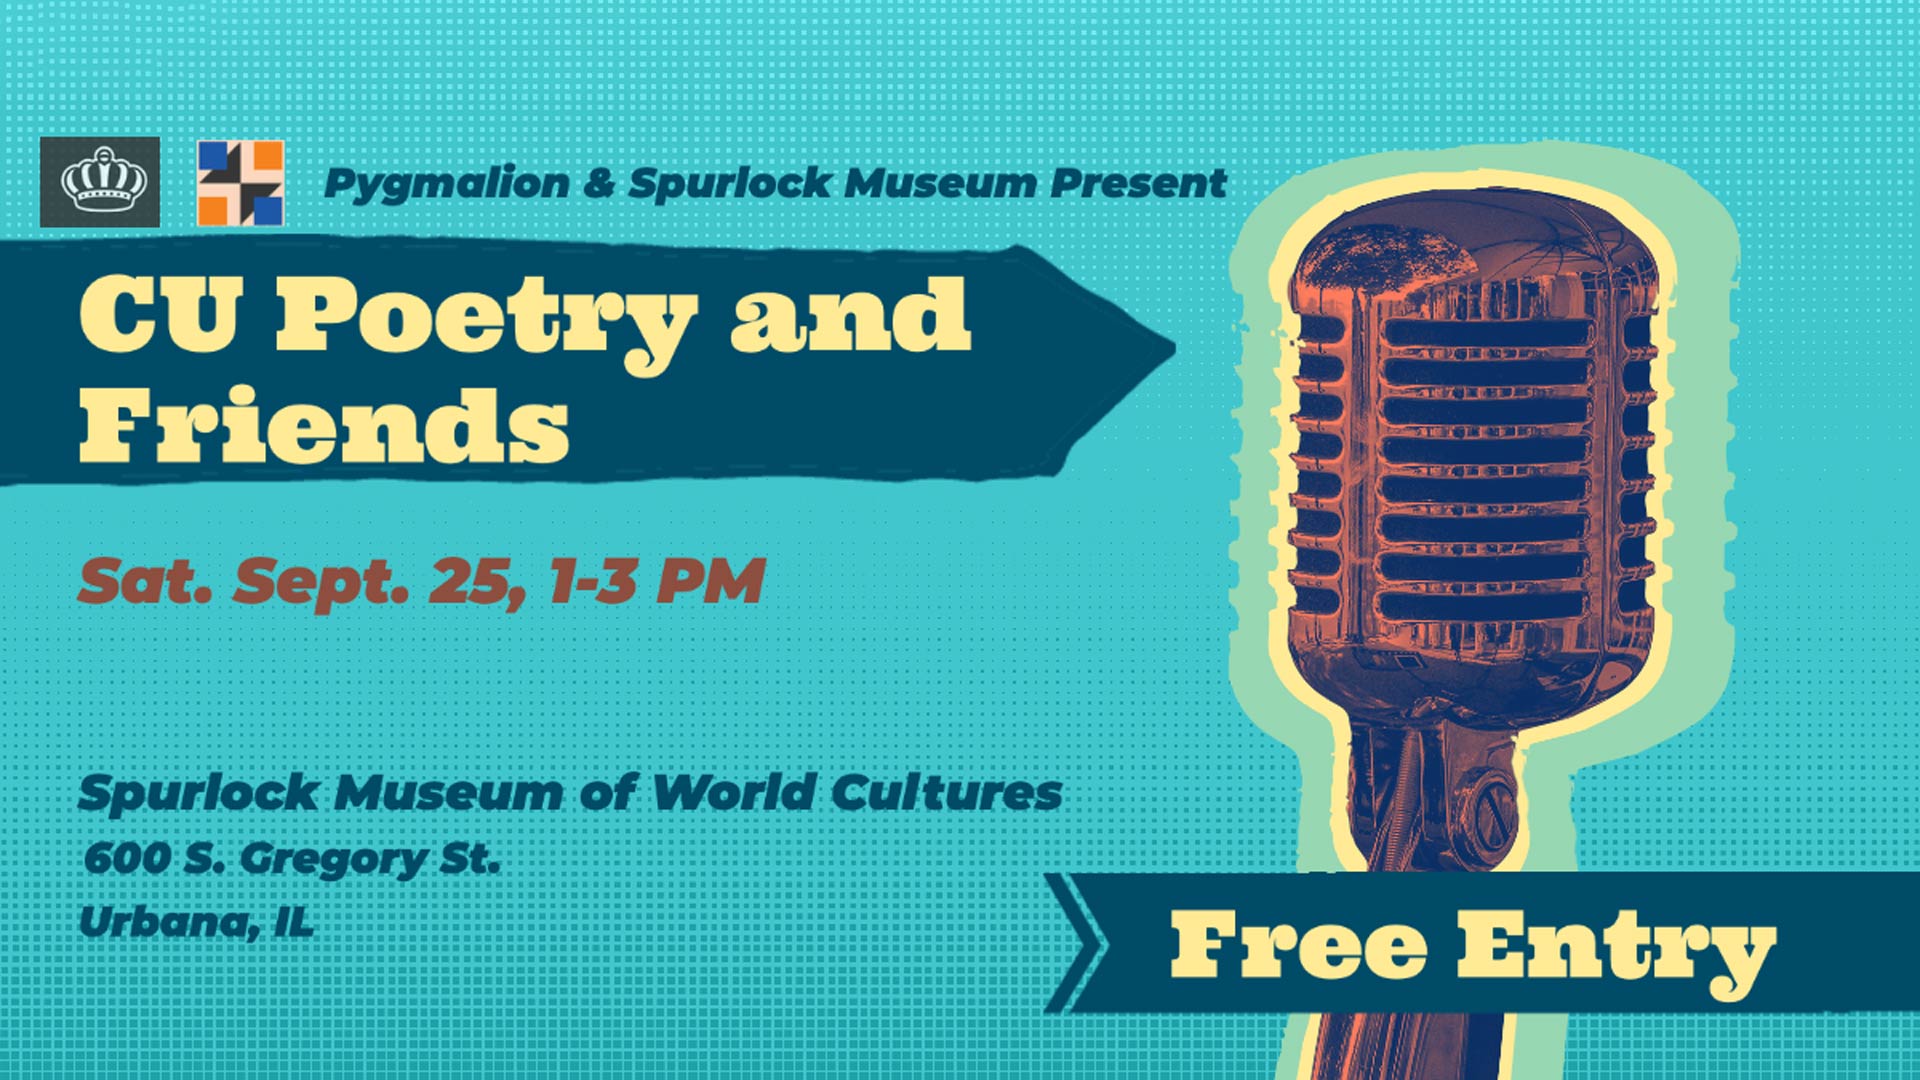 flyer that says CU Poetry and Friends Sat. Sept. 25, 1-3 PM with Spurlock Museum's address and an image of a mic